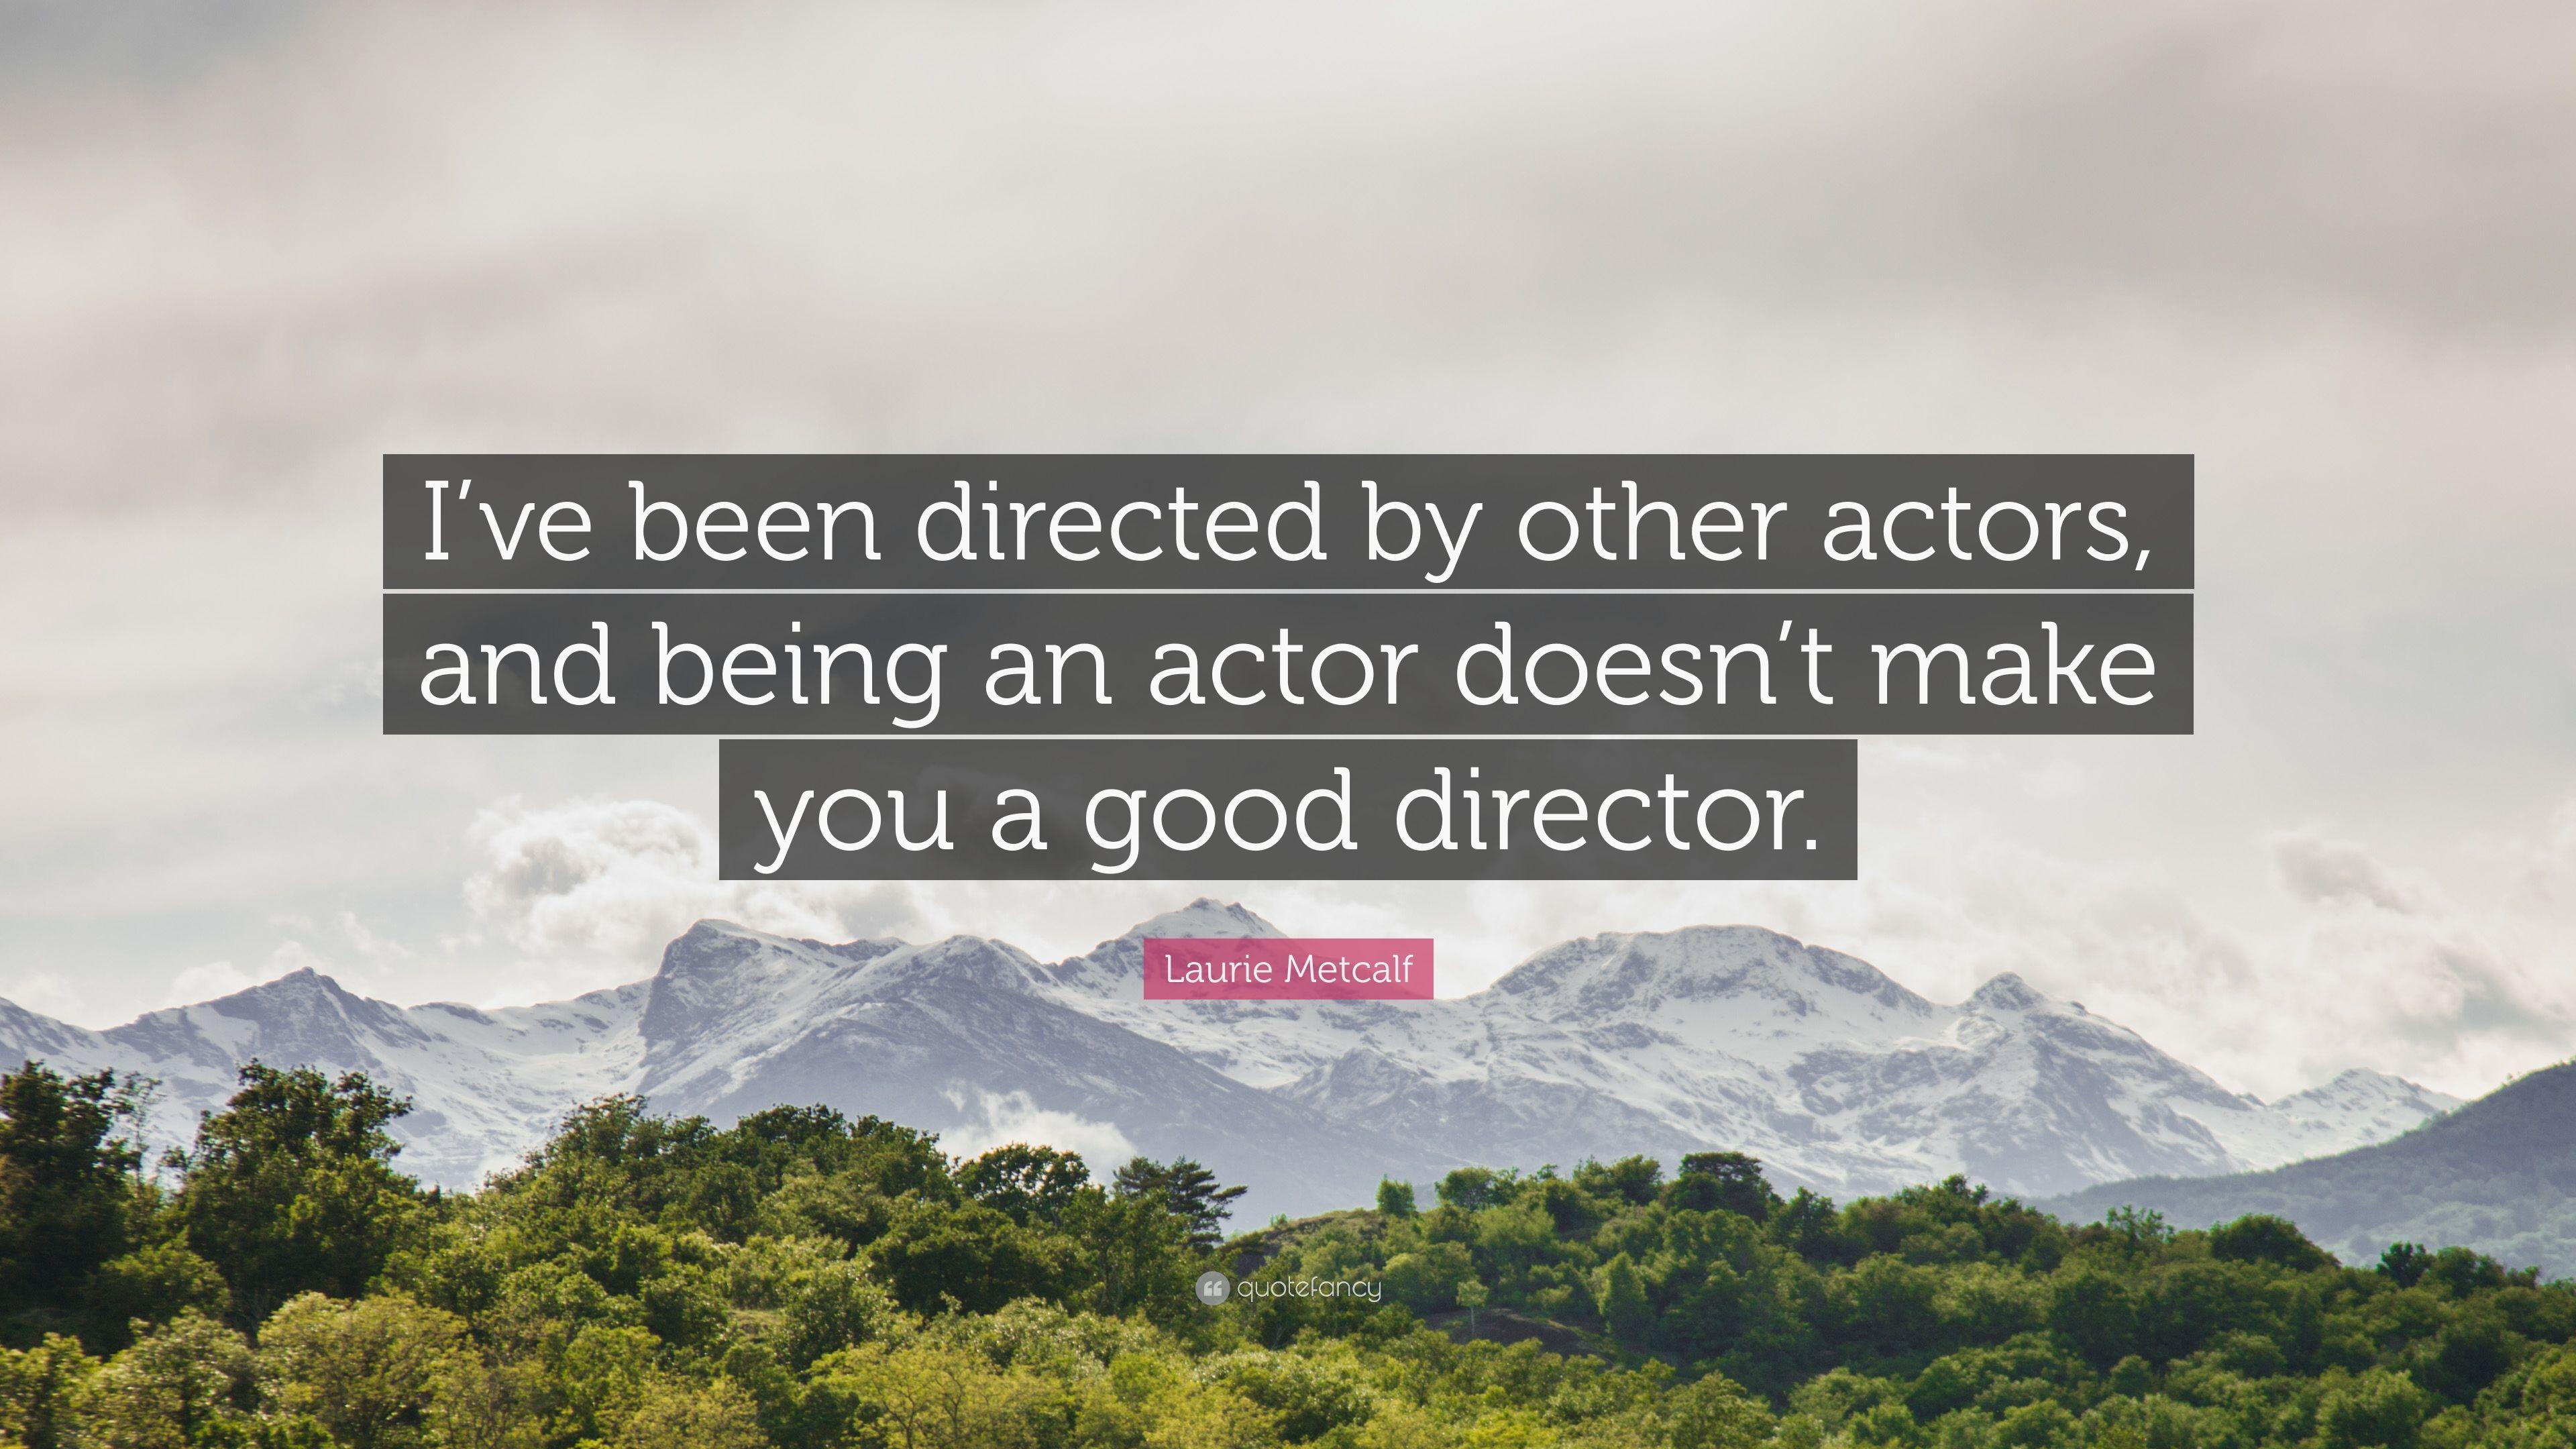 Laurie Metcalf Quote: “I've been directed by other actors, and being